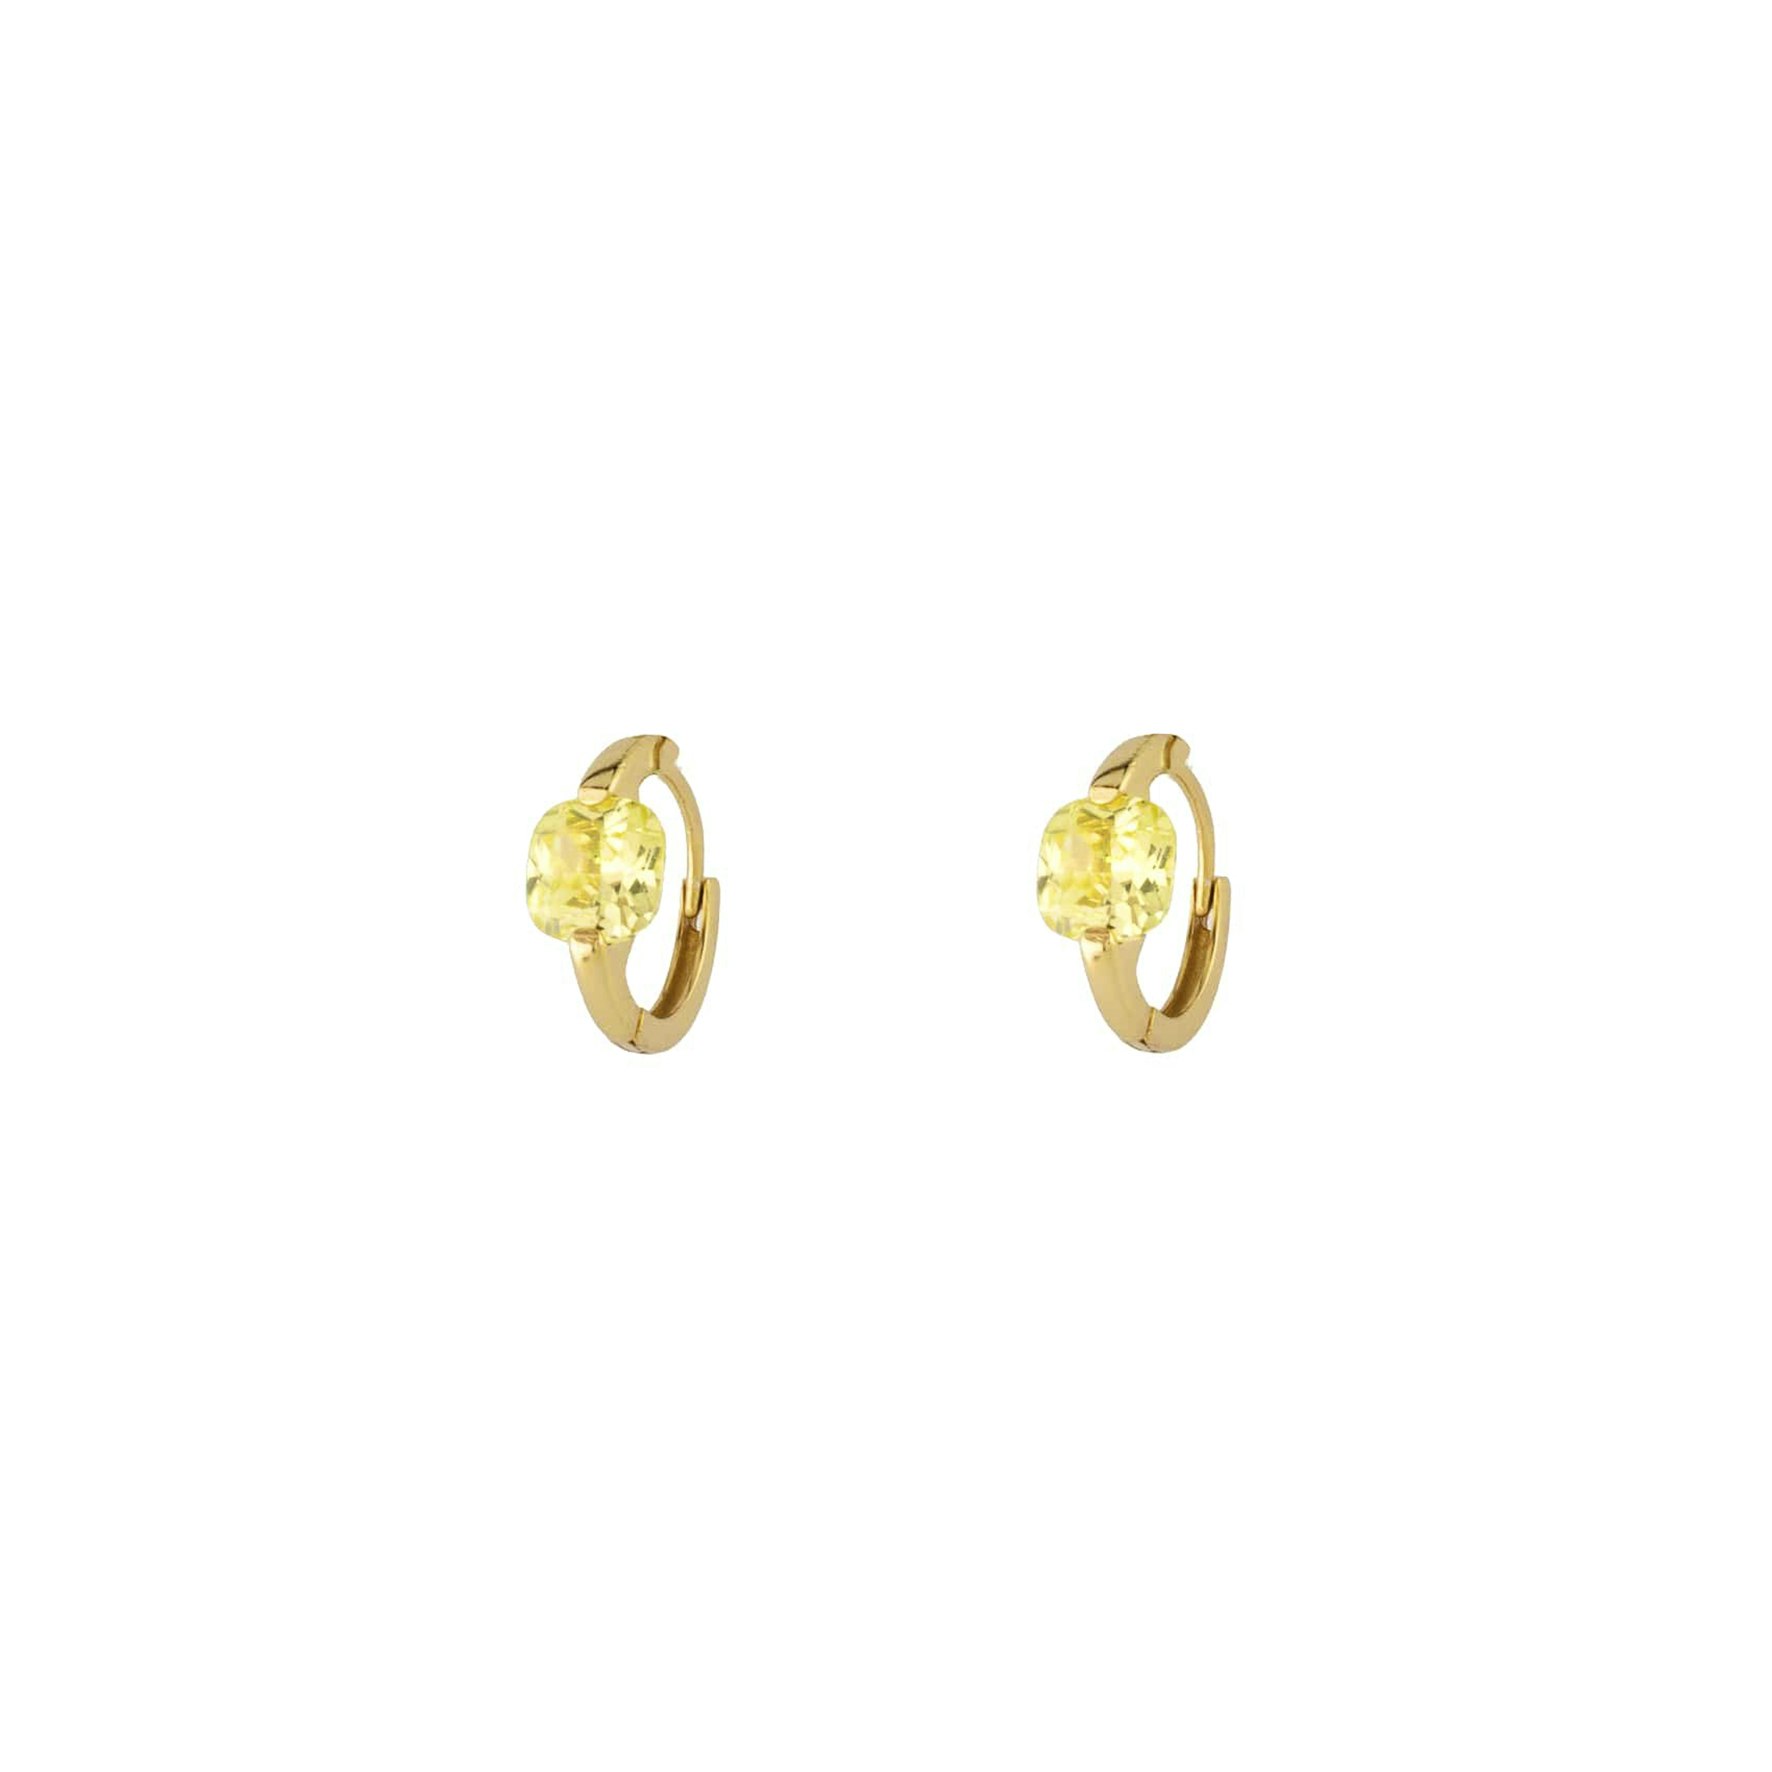 Iris Hoop Earrings Light Green Gilded from House Of Vincent in Goldplated Silver Sterling 925